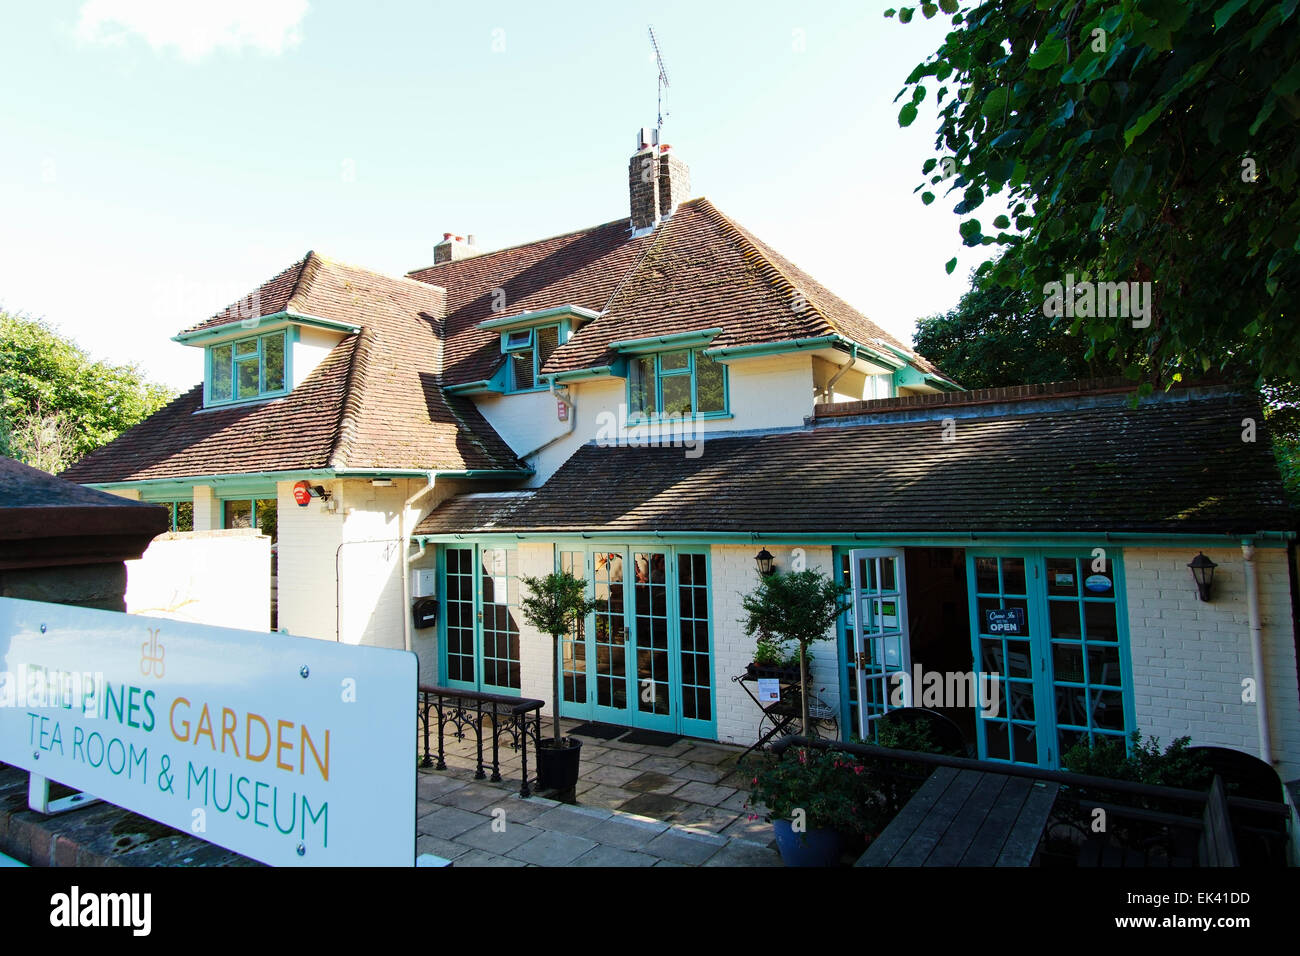 The Pines Garden Tea Room & Museum, Beach Road, St Margaret's at Cliffe, St Margaret's Bay, Dover, White Cliffs Country, Kent, England, United Kingdom Stock Photo